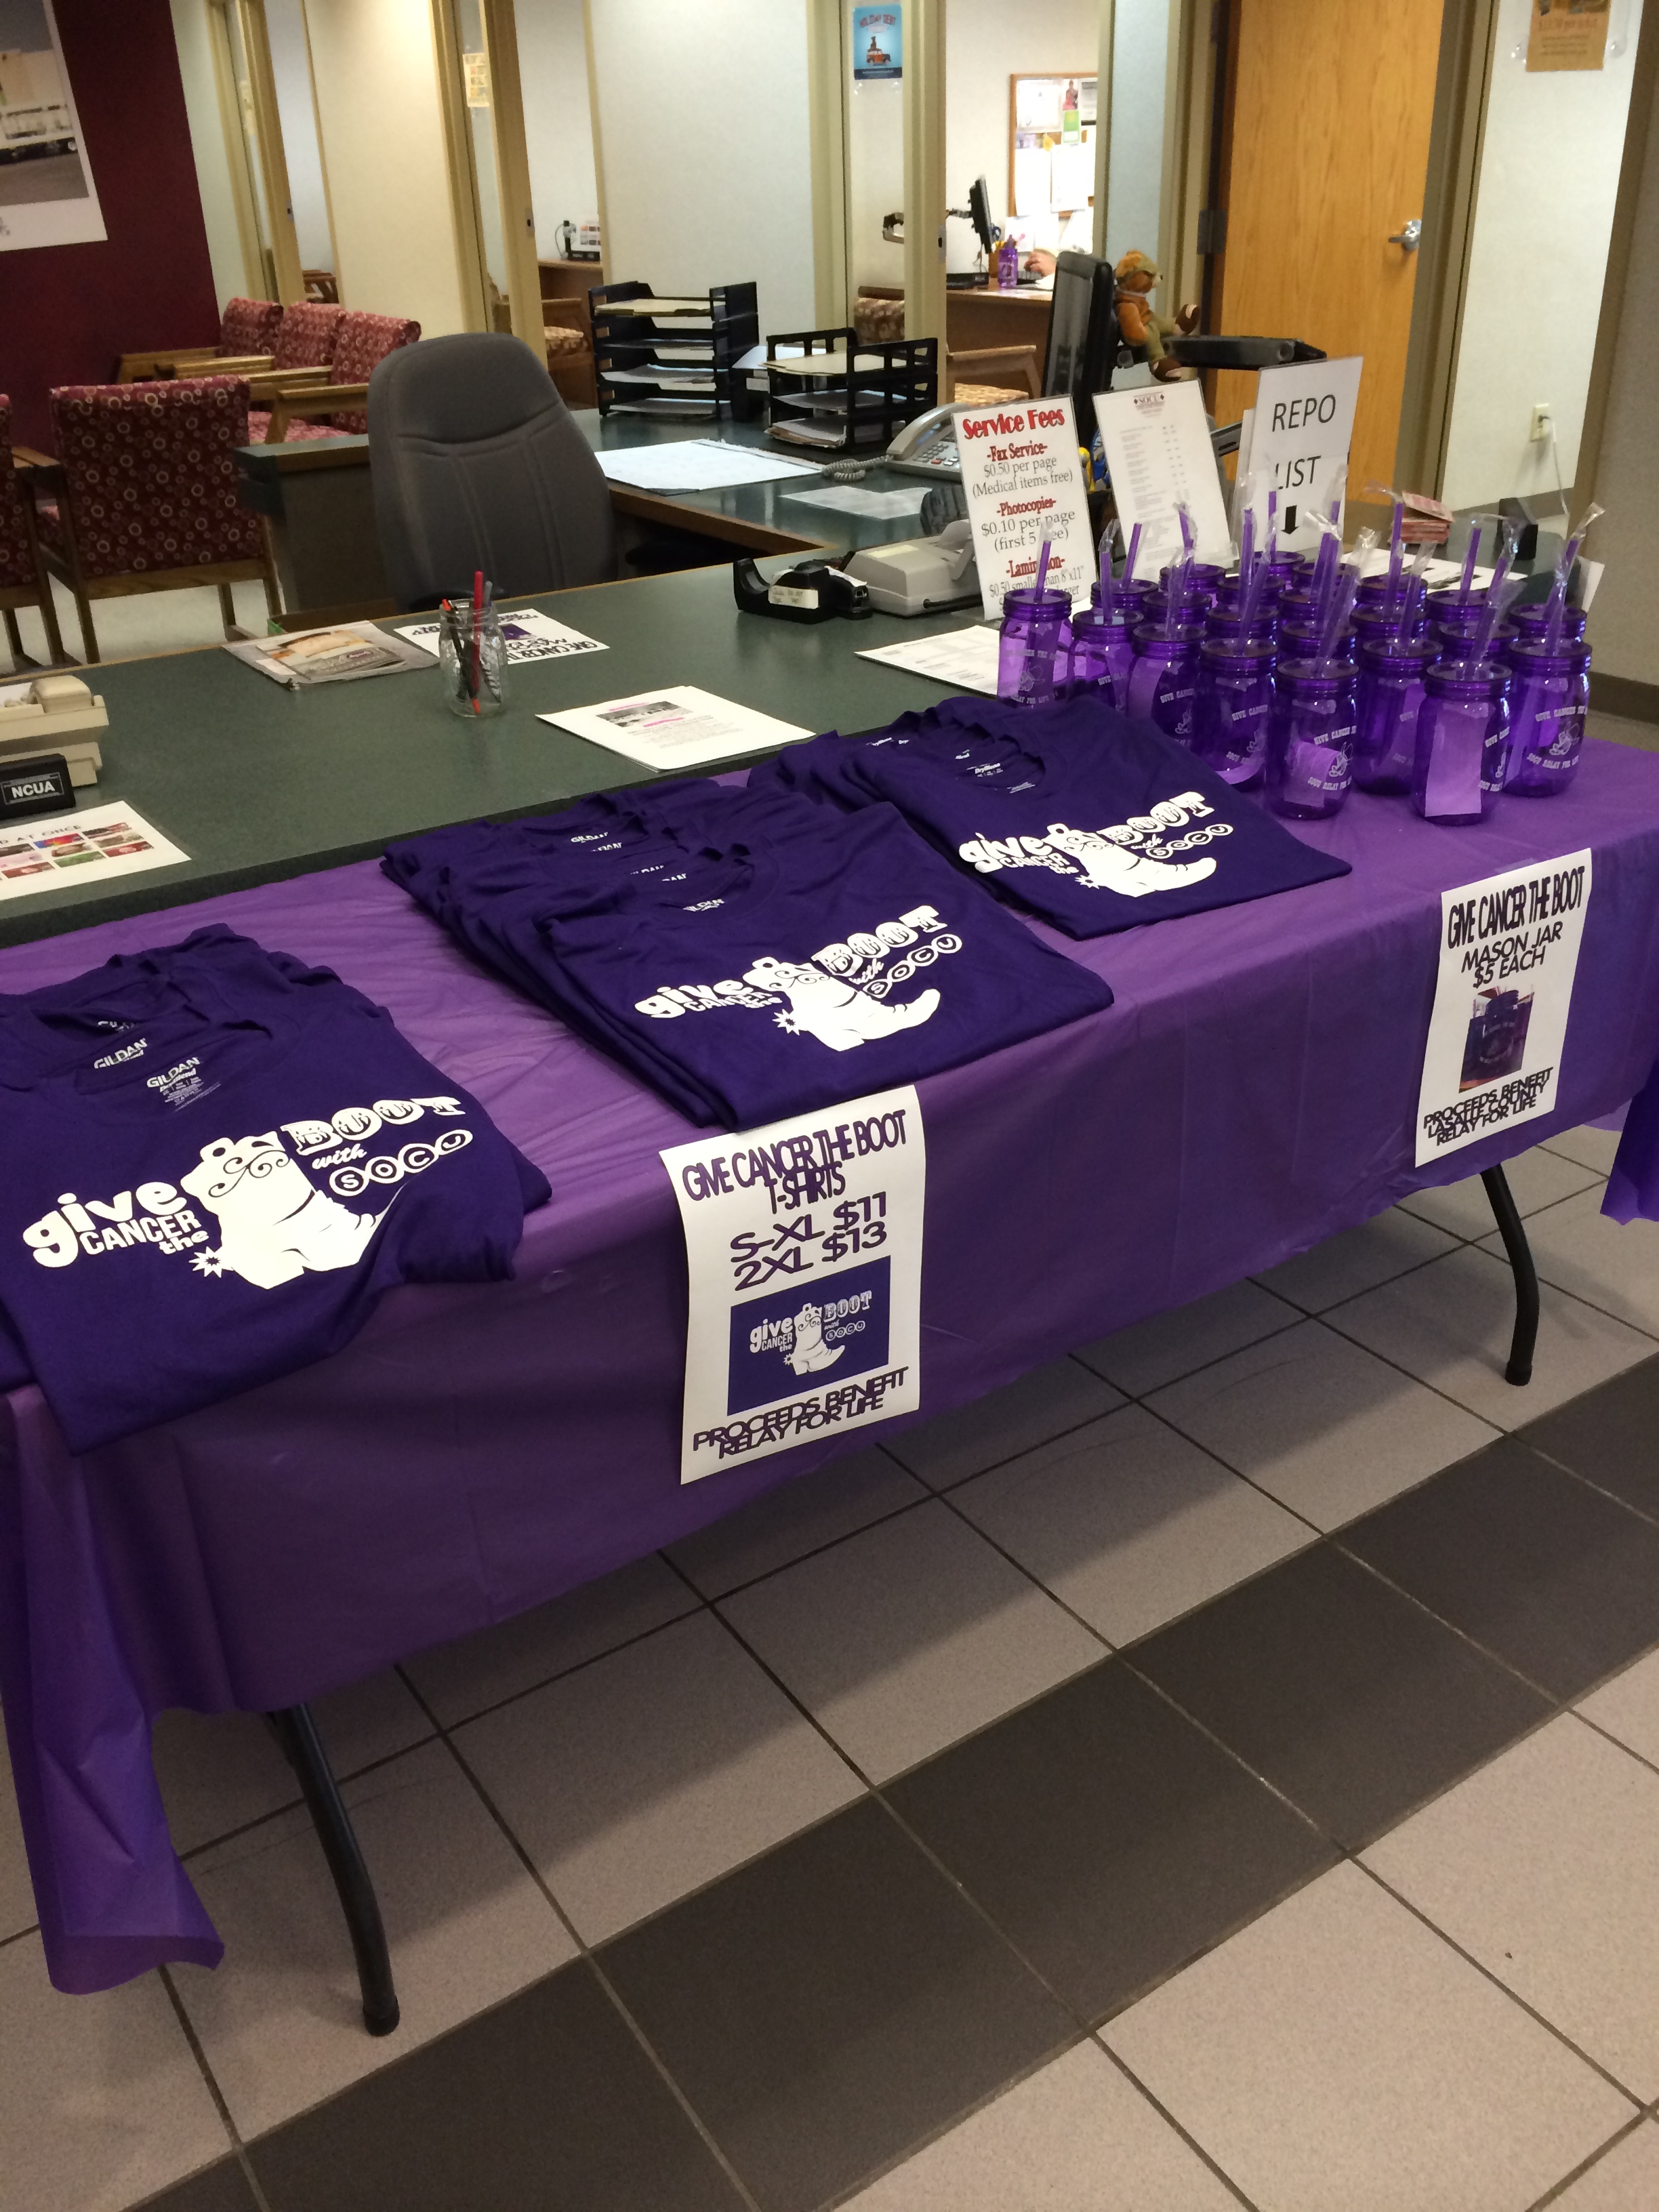 Give cancer the boot table with shirts and mugs for sale